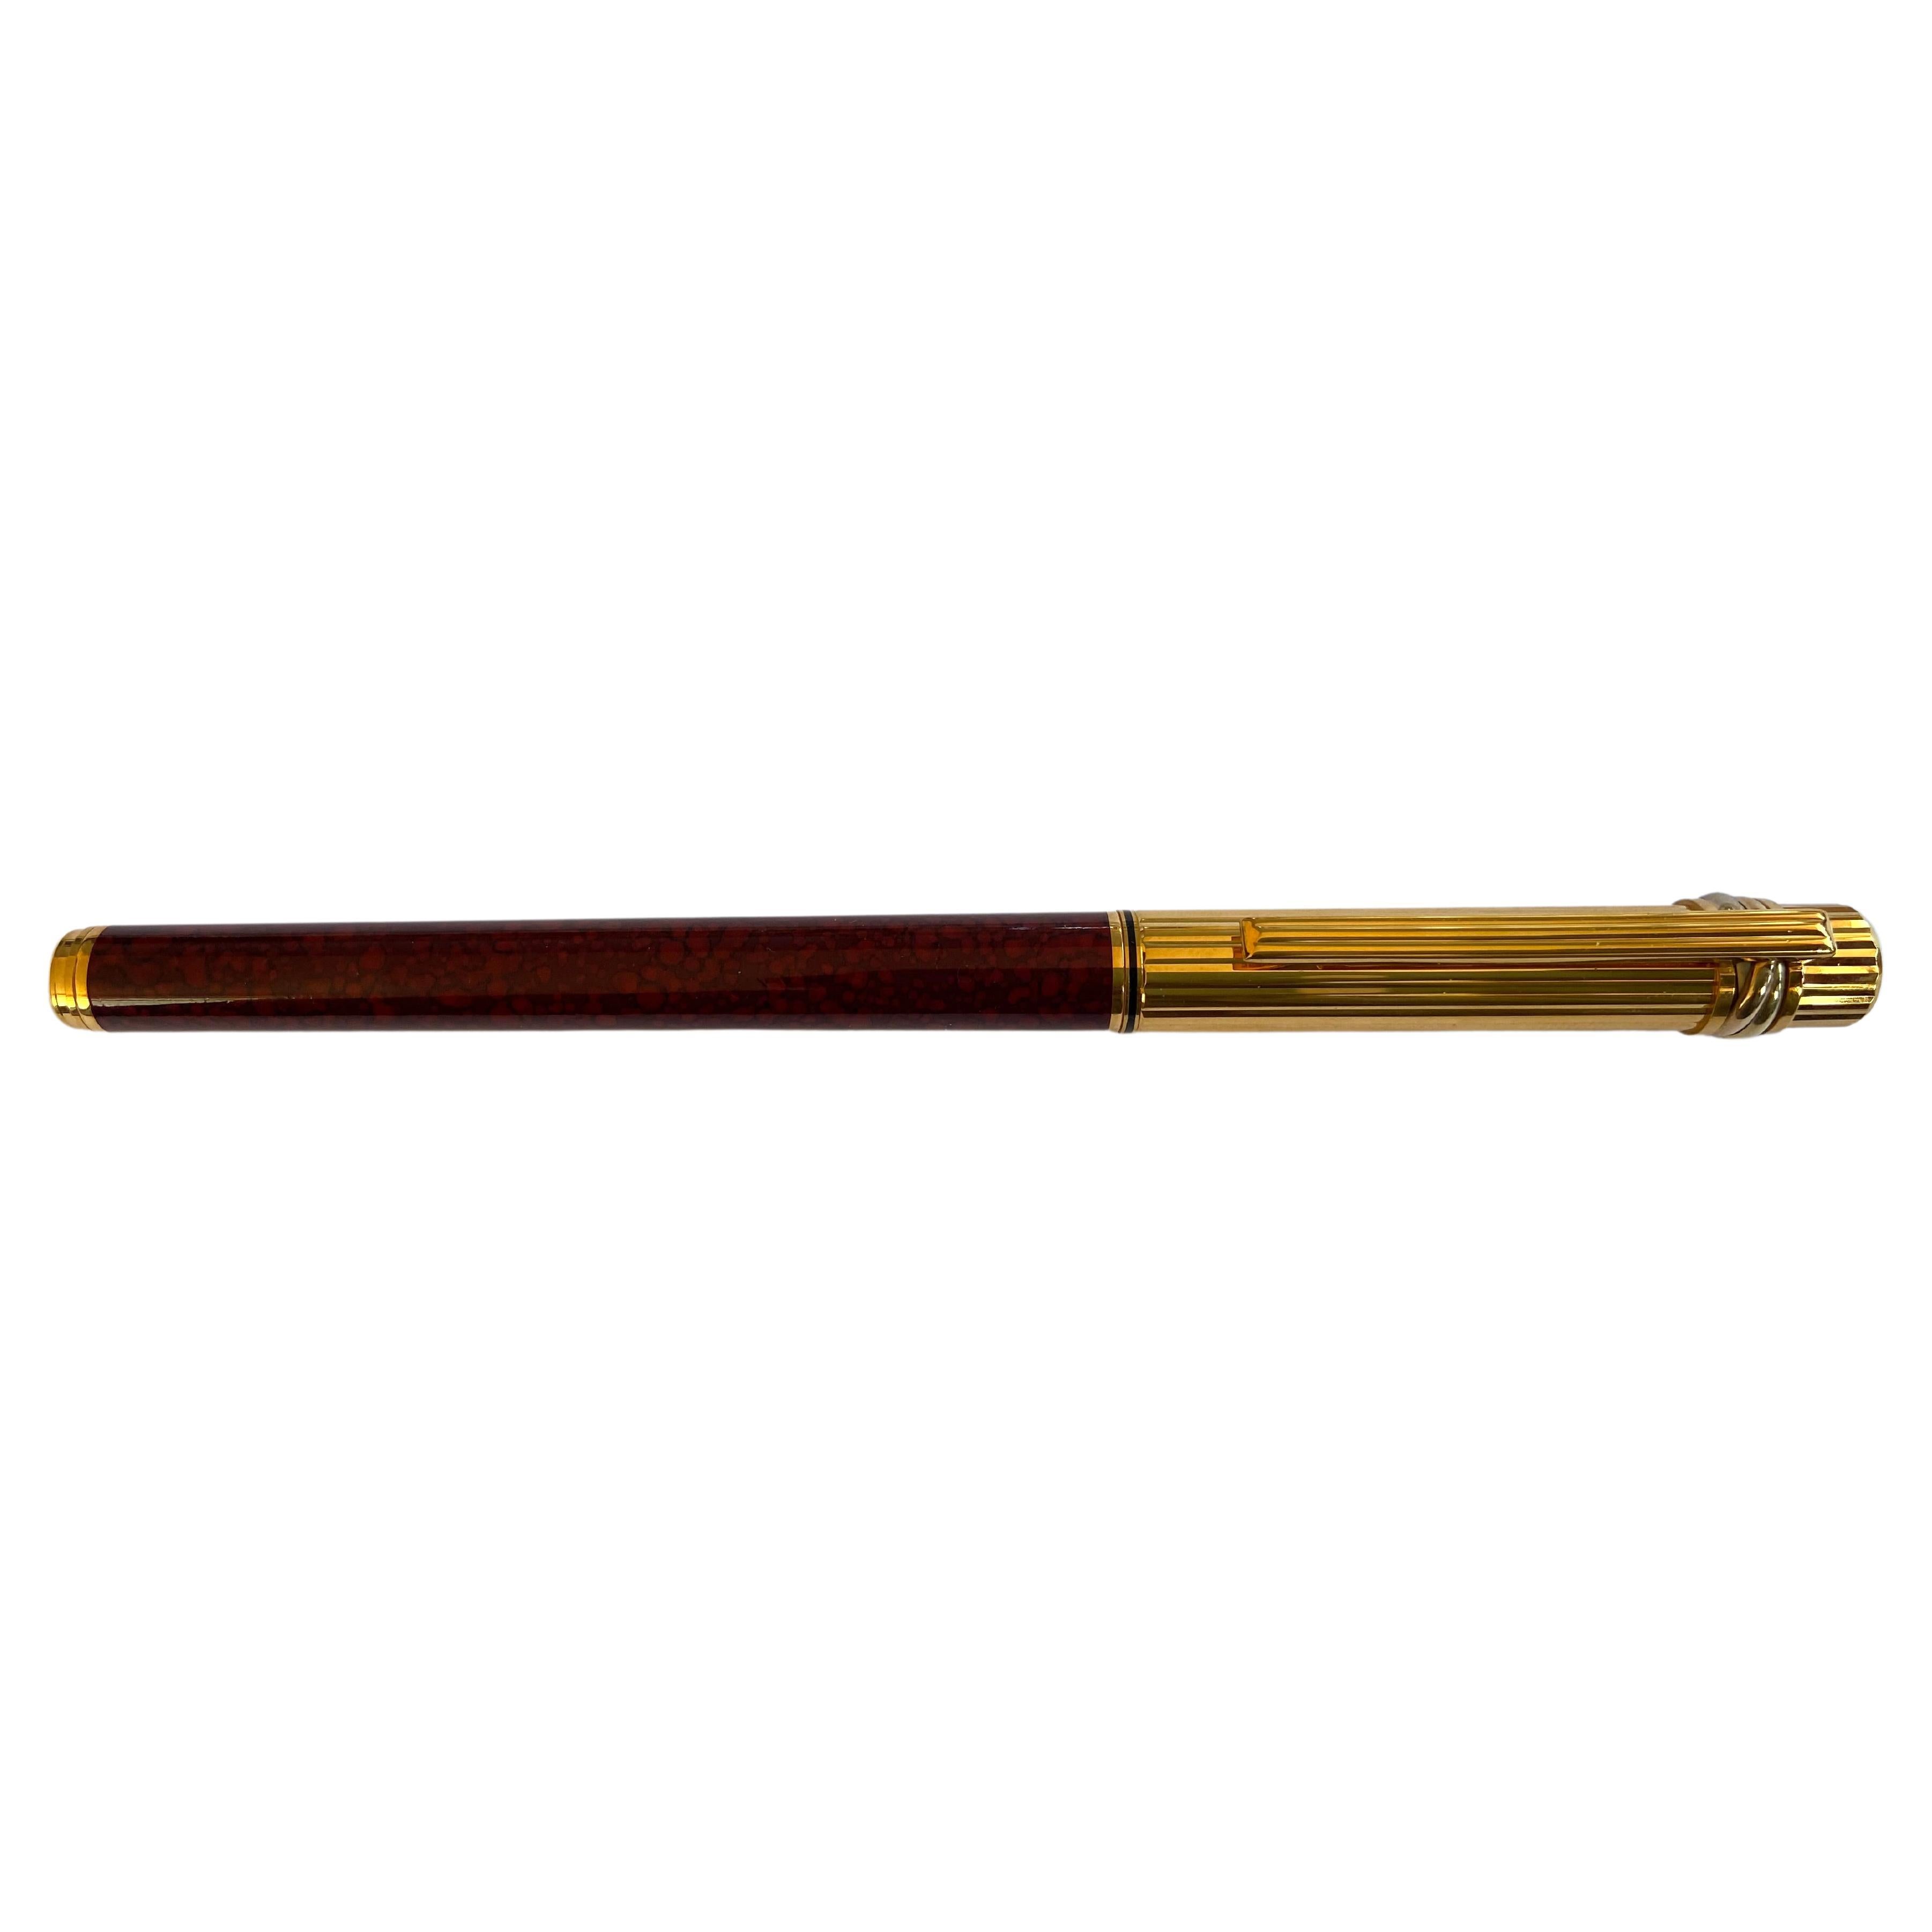 
Must De Cartier Fountain Pen 18 Kt Gold.
It dates back to the 1990s, used only once and then kept in excellent condition. No box.